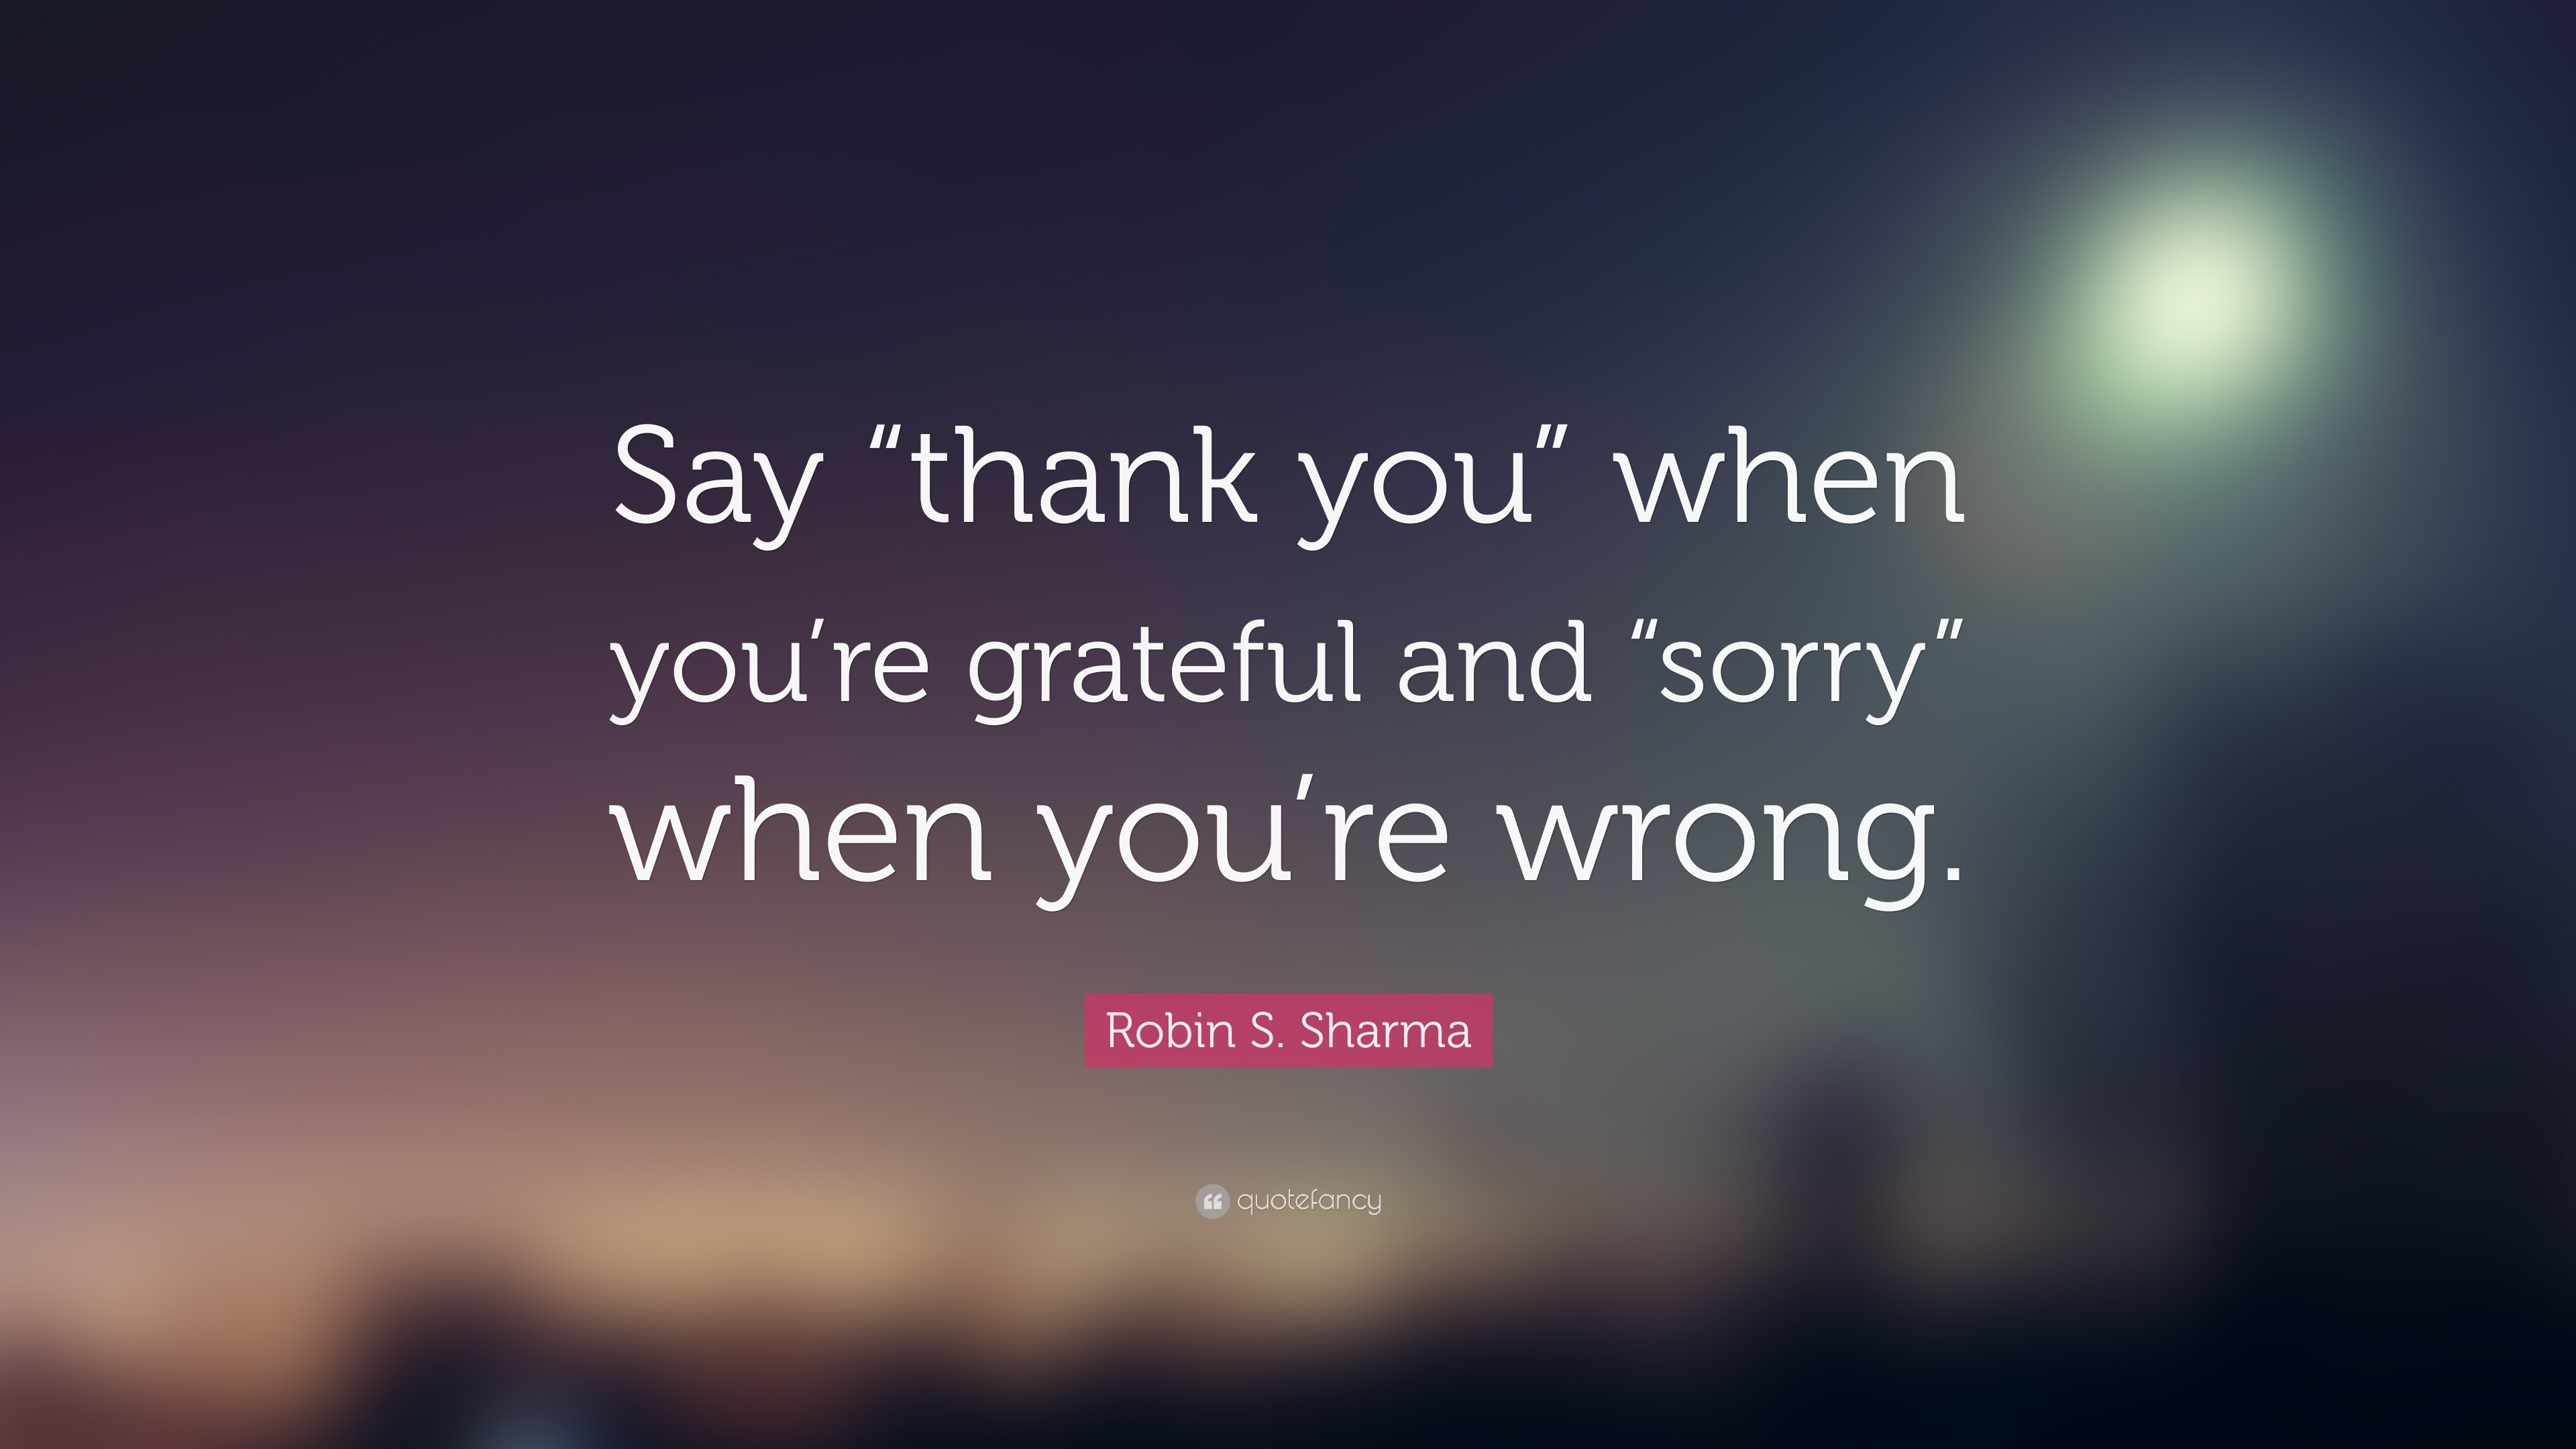 3840x2160 Robin S. Sharma Quote: “Say “thank you” when you're